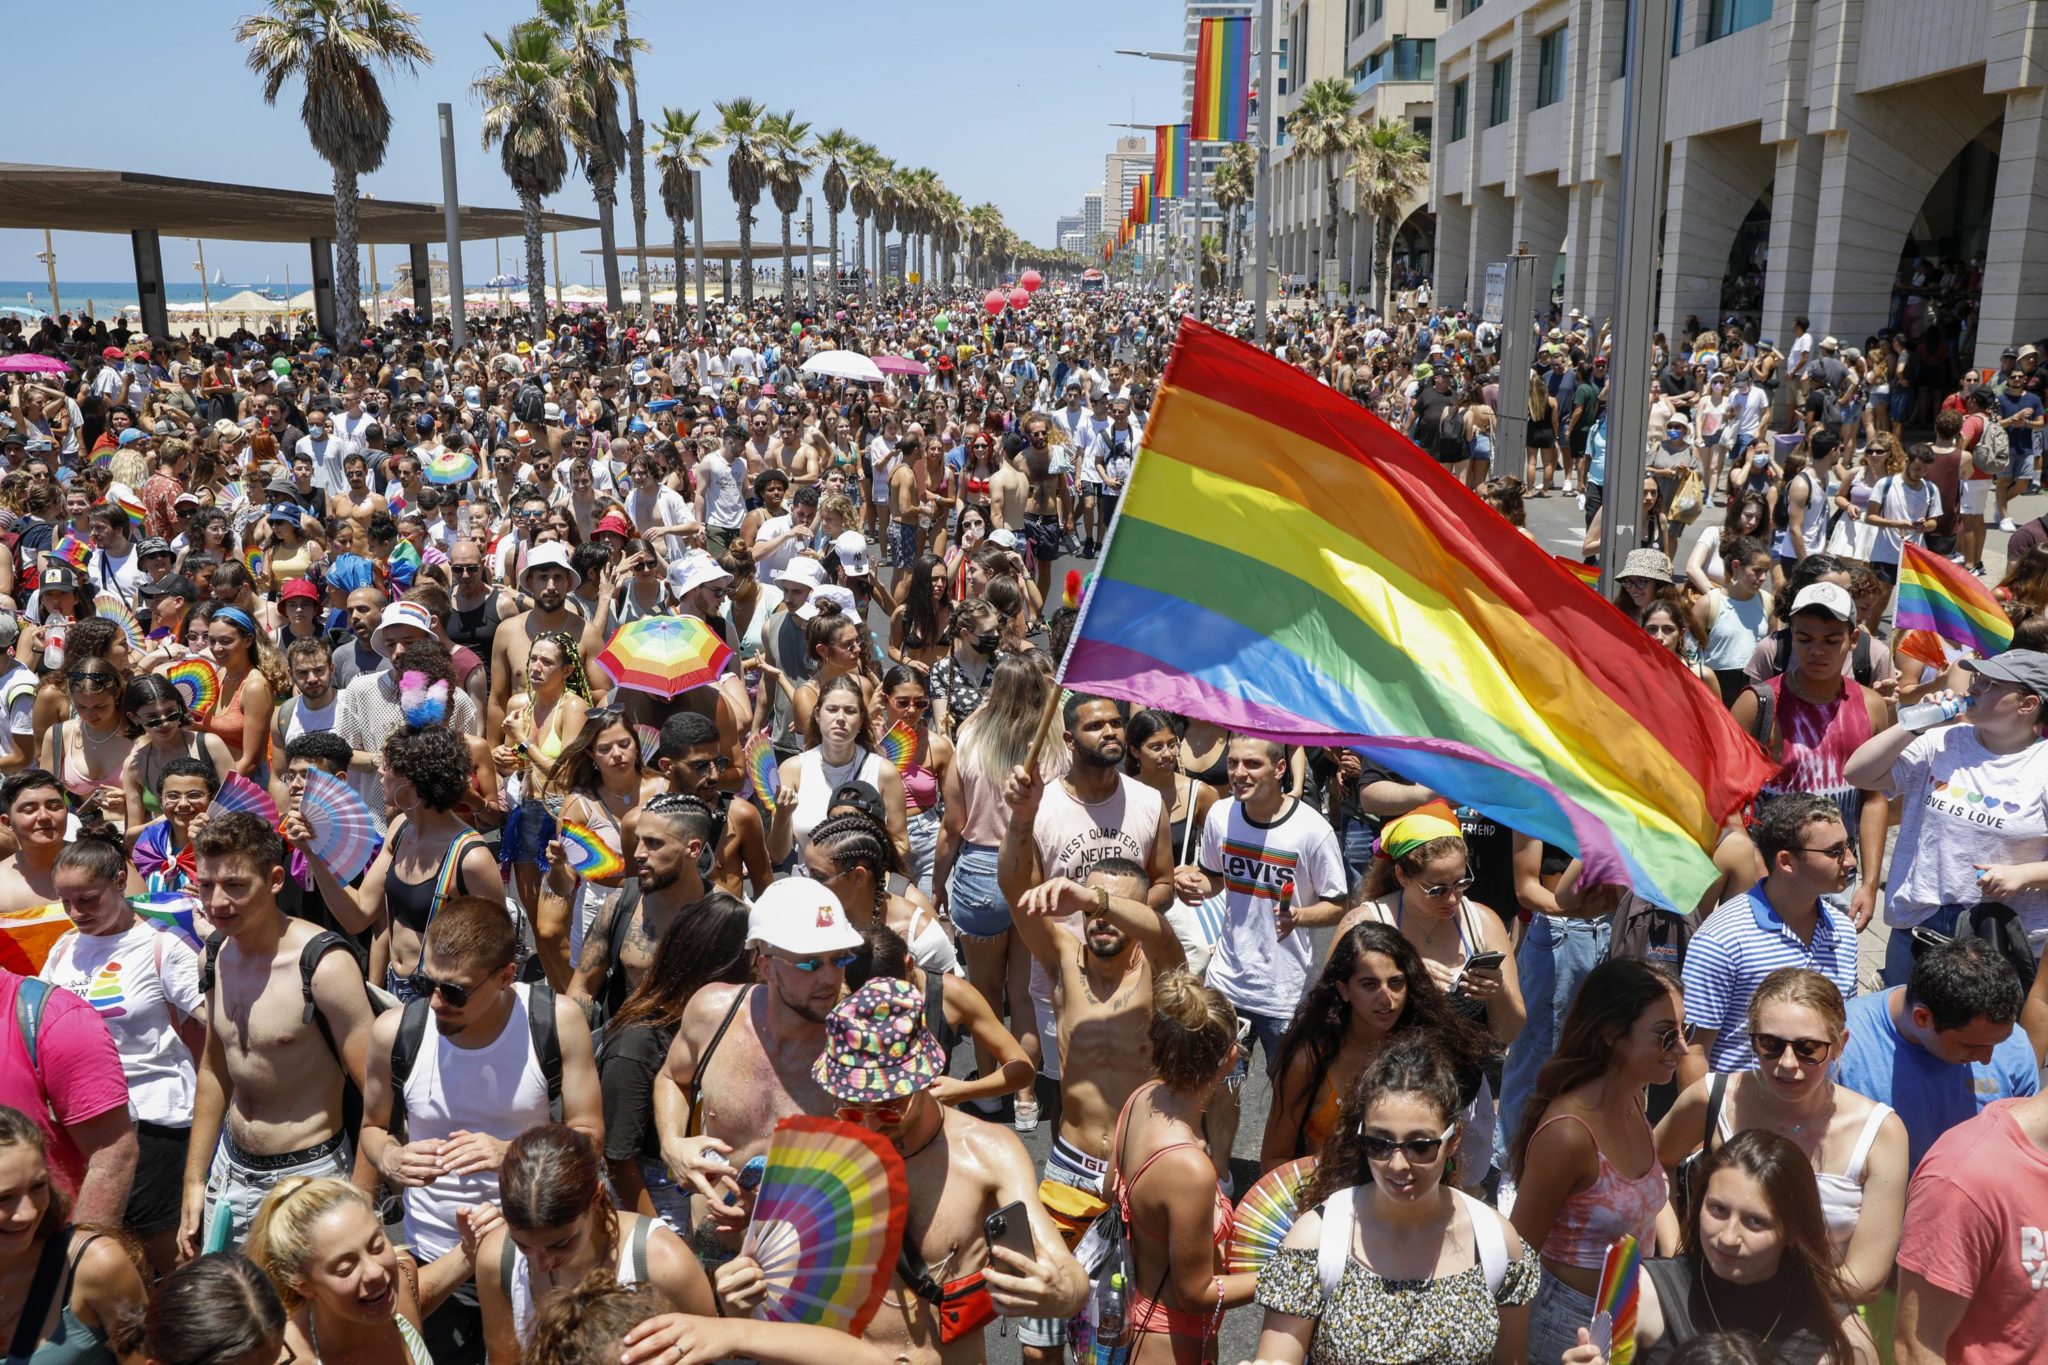 Tens of thousands attend Pride parade in Israel’s Tel Aviv The